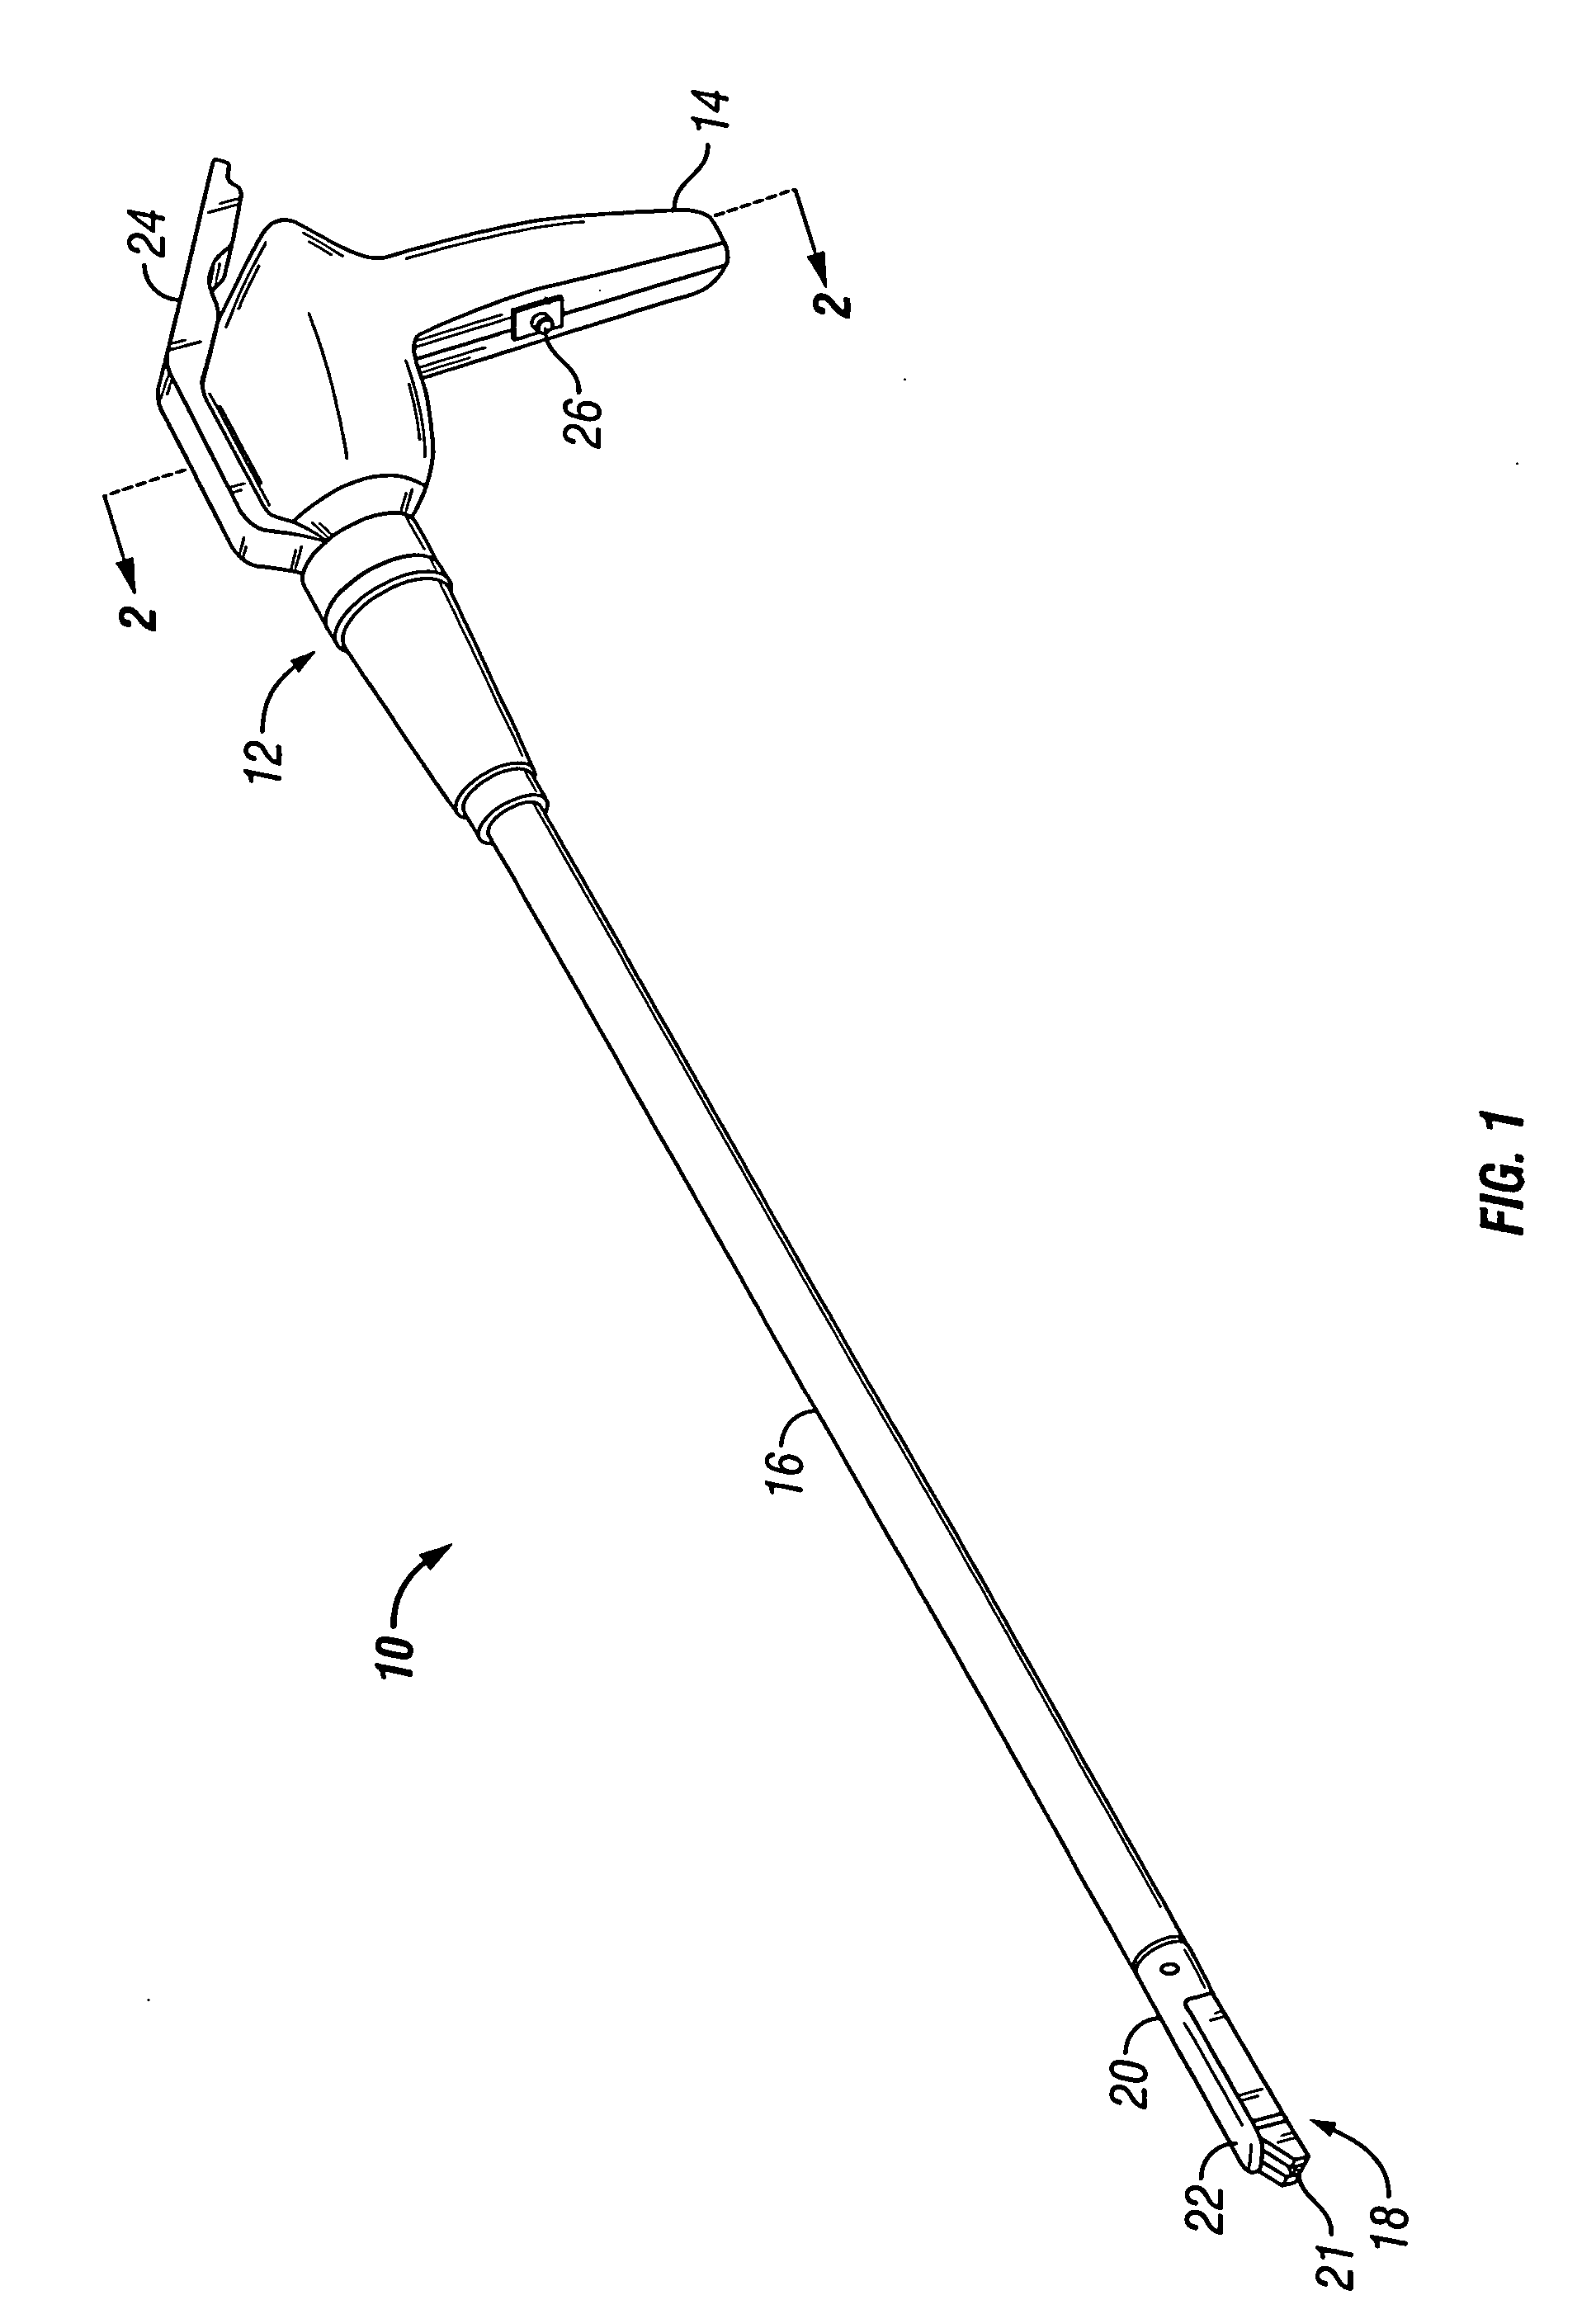 Battery powered surgical instrument